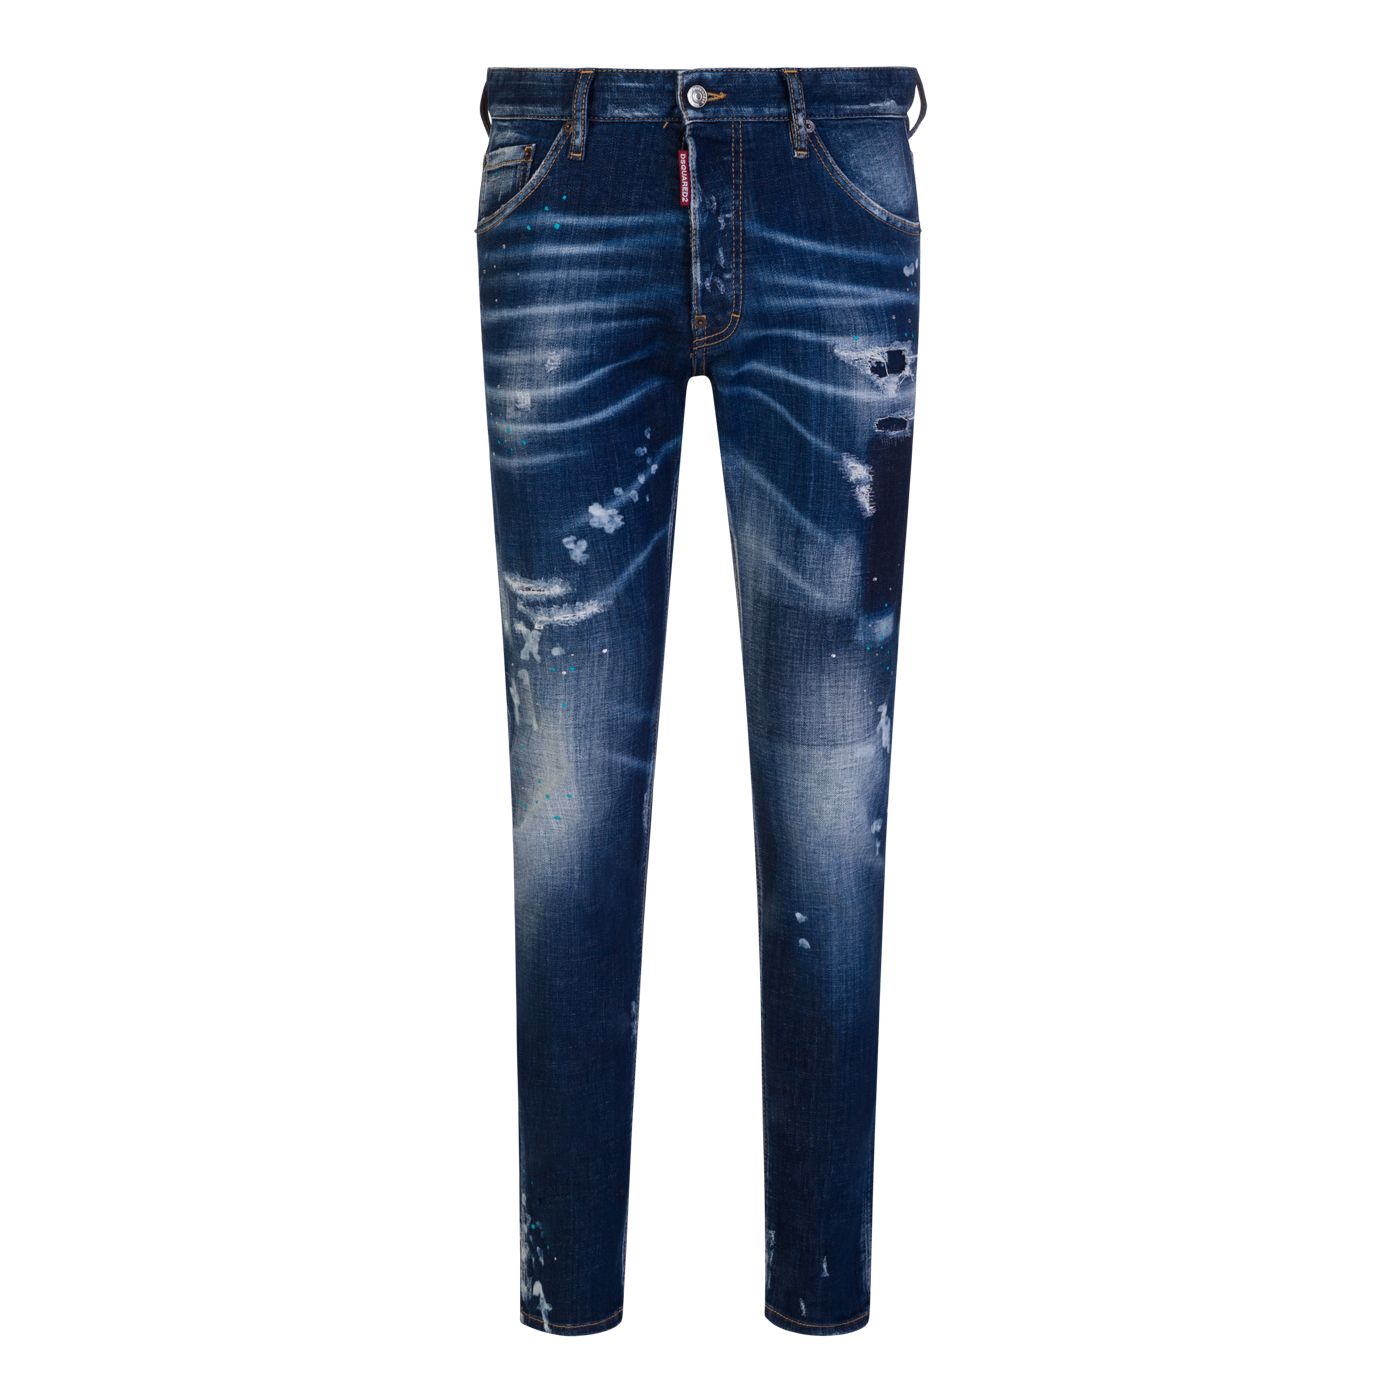 DSquared2 'Cool Guy' Twinphony Slim Fit Jeans Blue Jeans